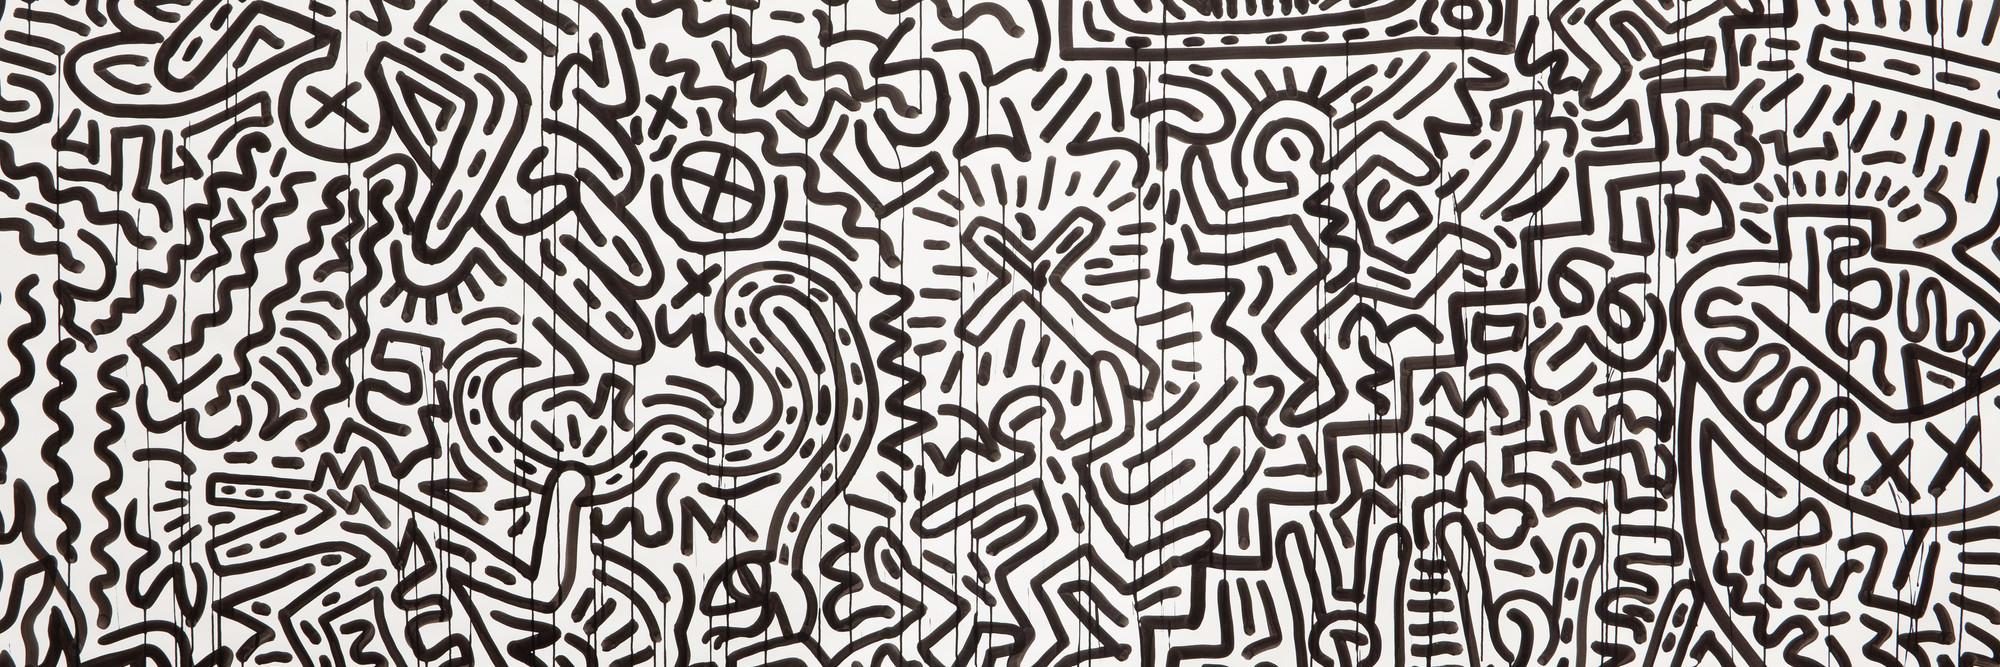 Keith Haring. Untitled. 1982. Ink on two sheets of paper, sheet: 72 × 671 1/2&#34; (182.9 × 1705.6cm) Part (panel a): 72 × 360 3/4&#34; (182.9 × 916.3 cm) Part (panel b): 72 × 310 1/4&#34; (182.9 × 788 cm). Gift of the Estate of Keith Haring, Inc. © 2019 The Keith Haring Foundation